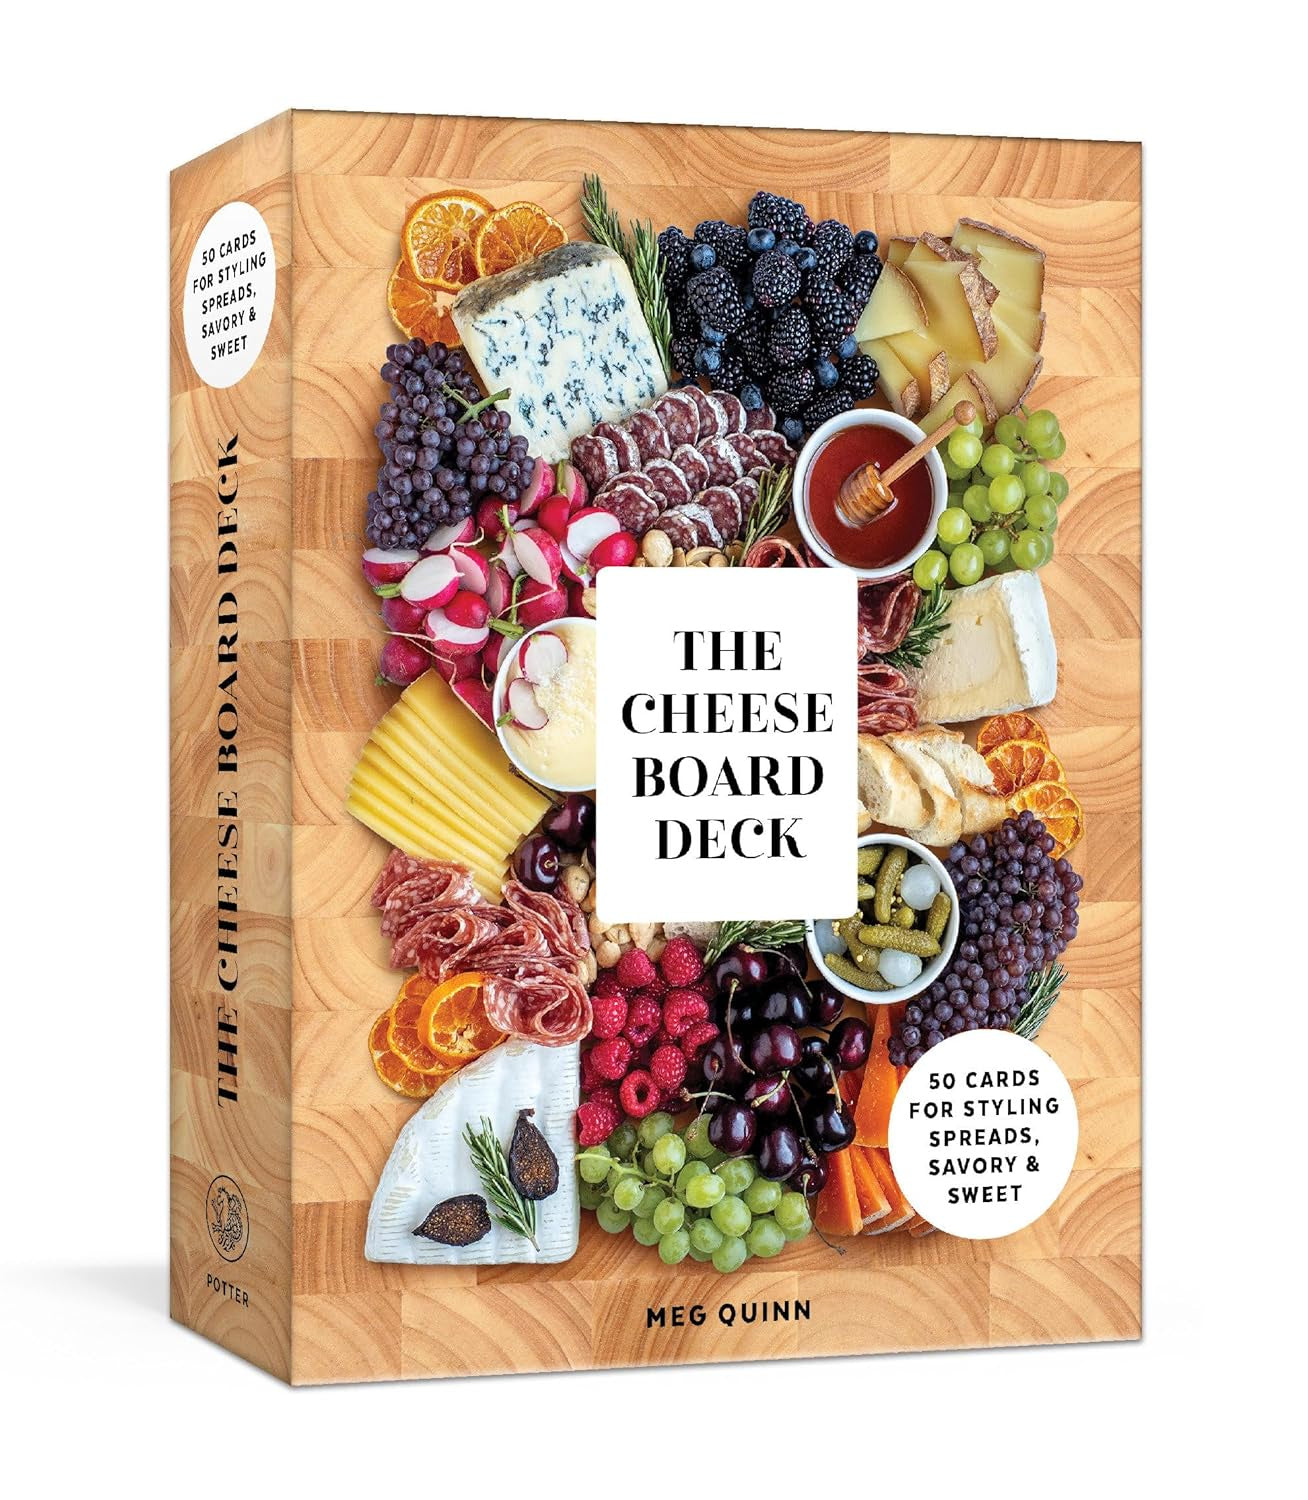 Book cover titled &quot;The Cheese Board Deck&quot; by Random House featuring an array of cheeses, fruits, and meats artistically arranged around the title text. Bright colors and diverse textures are visible, showcasing exquisite food styling.